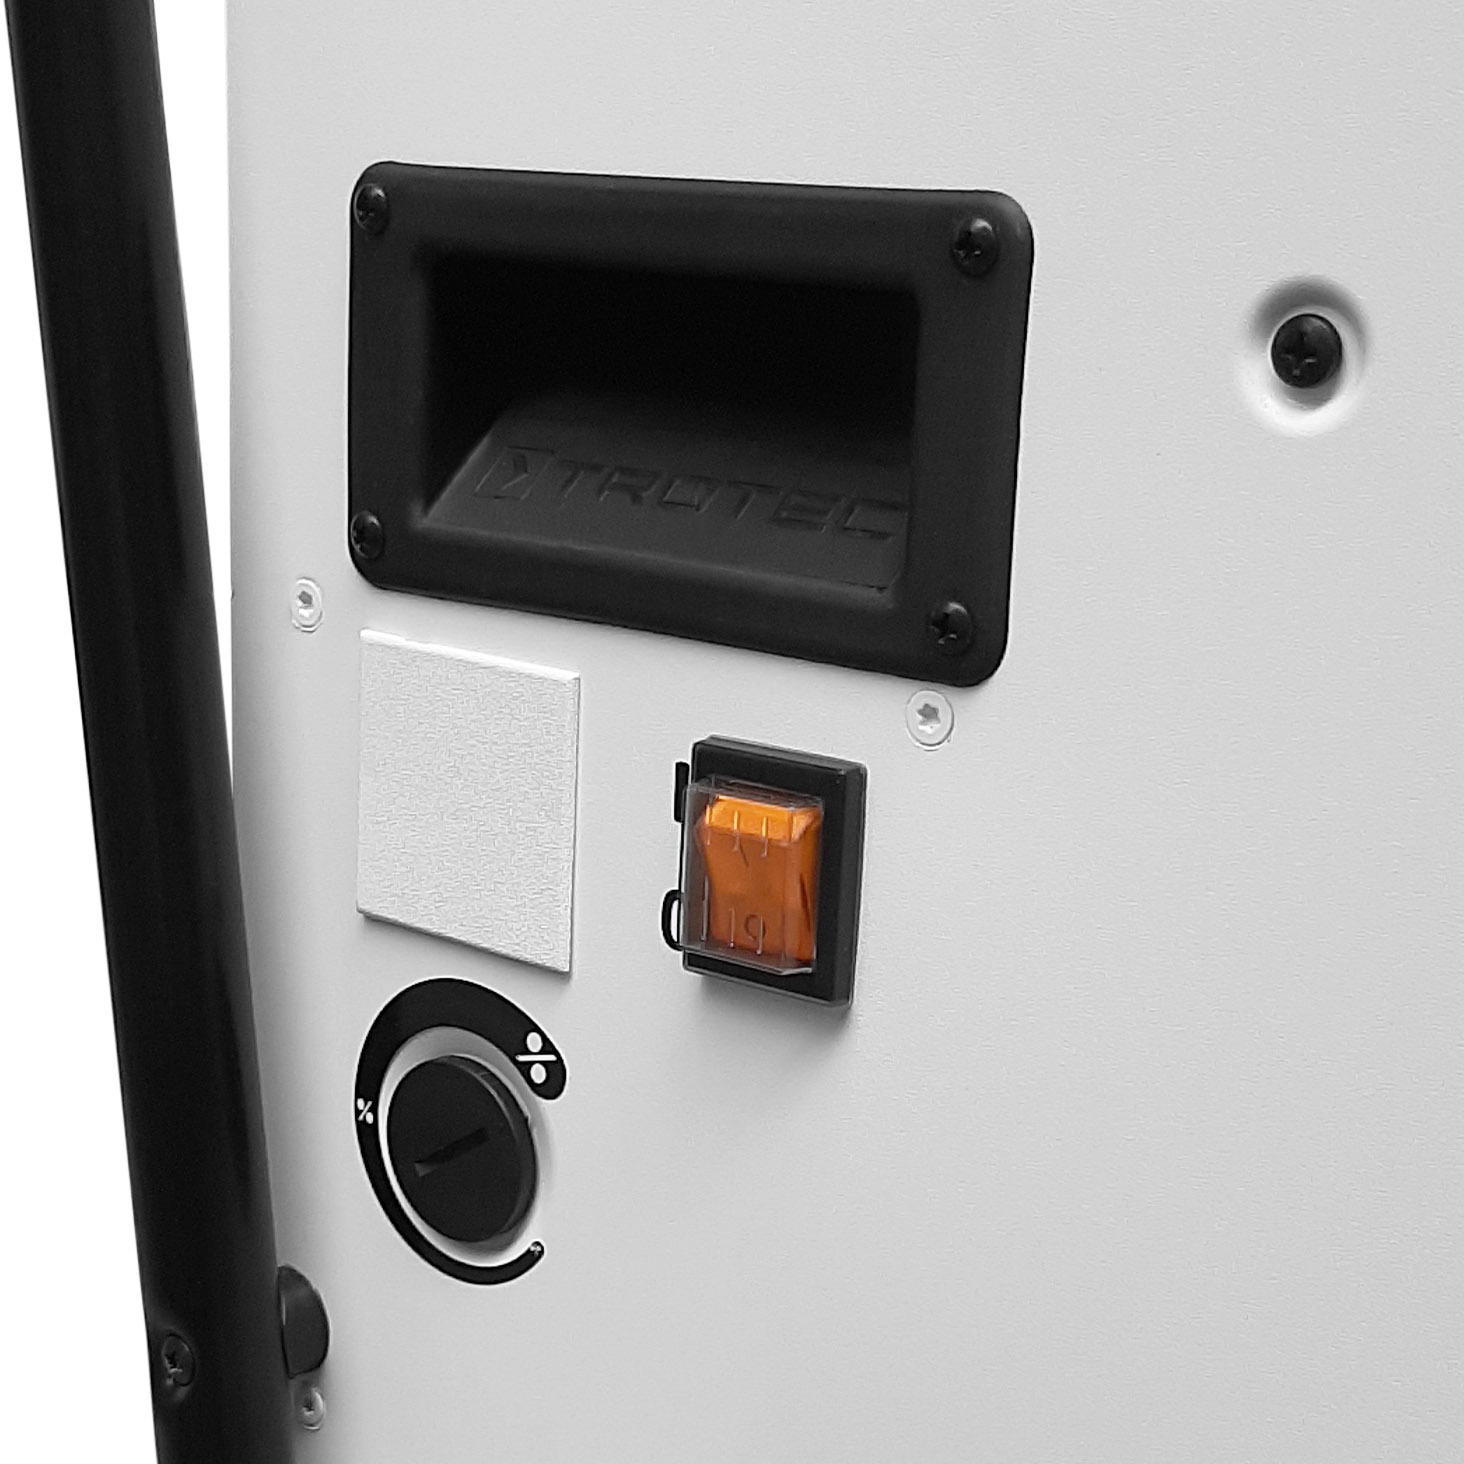 TTK 650 S – operating switch and filling level warning light